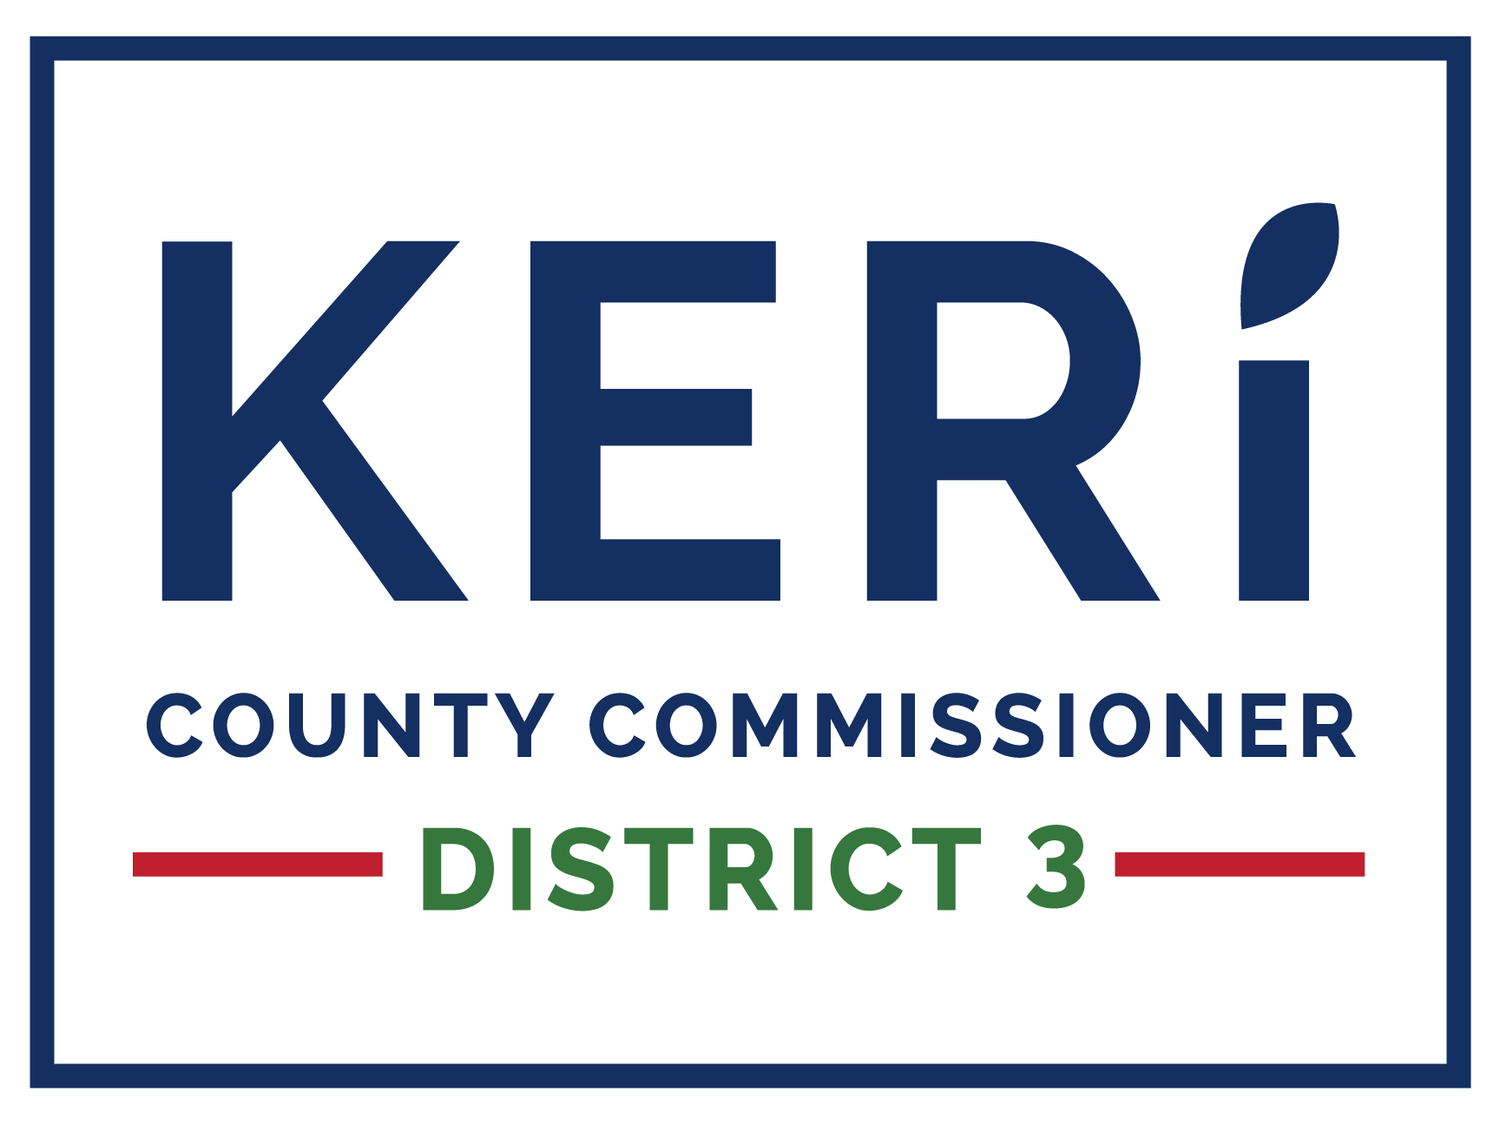 Keri Pitzer for County Commissioner, District 3